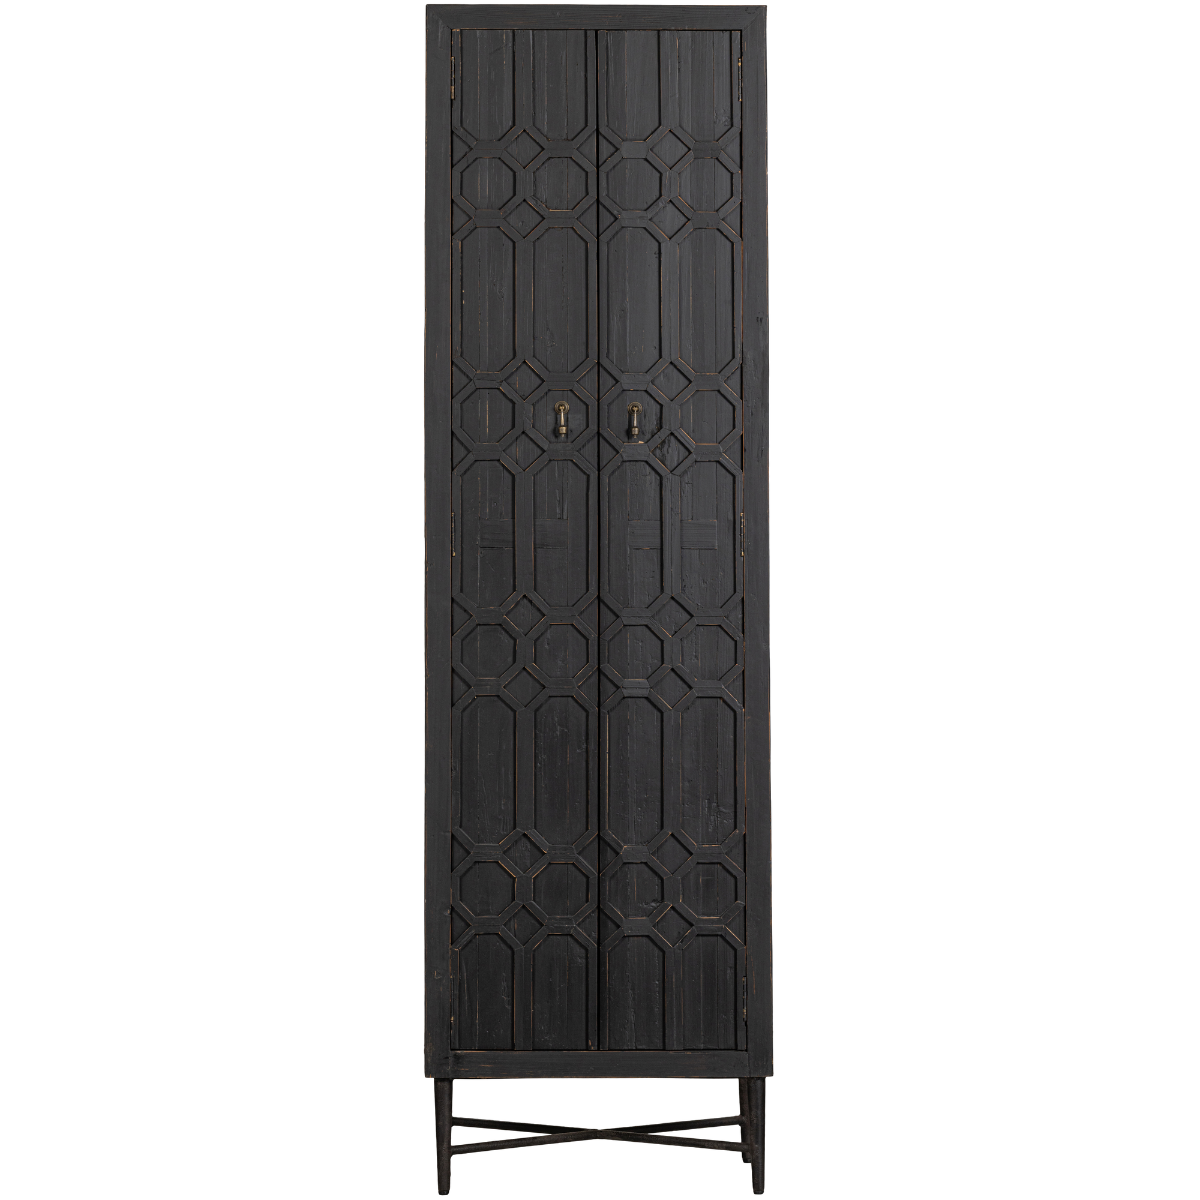 Bequest Black Wood High Cabinet